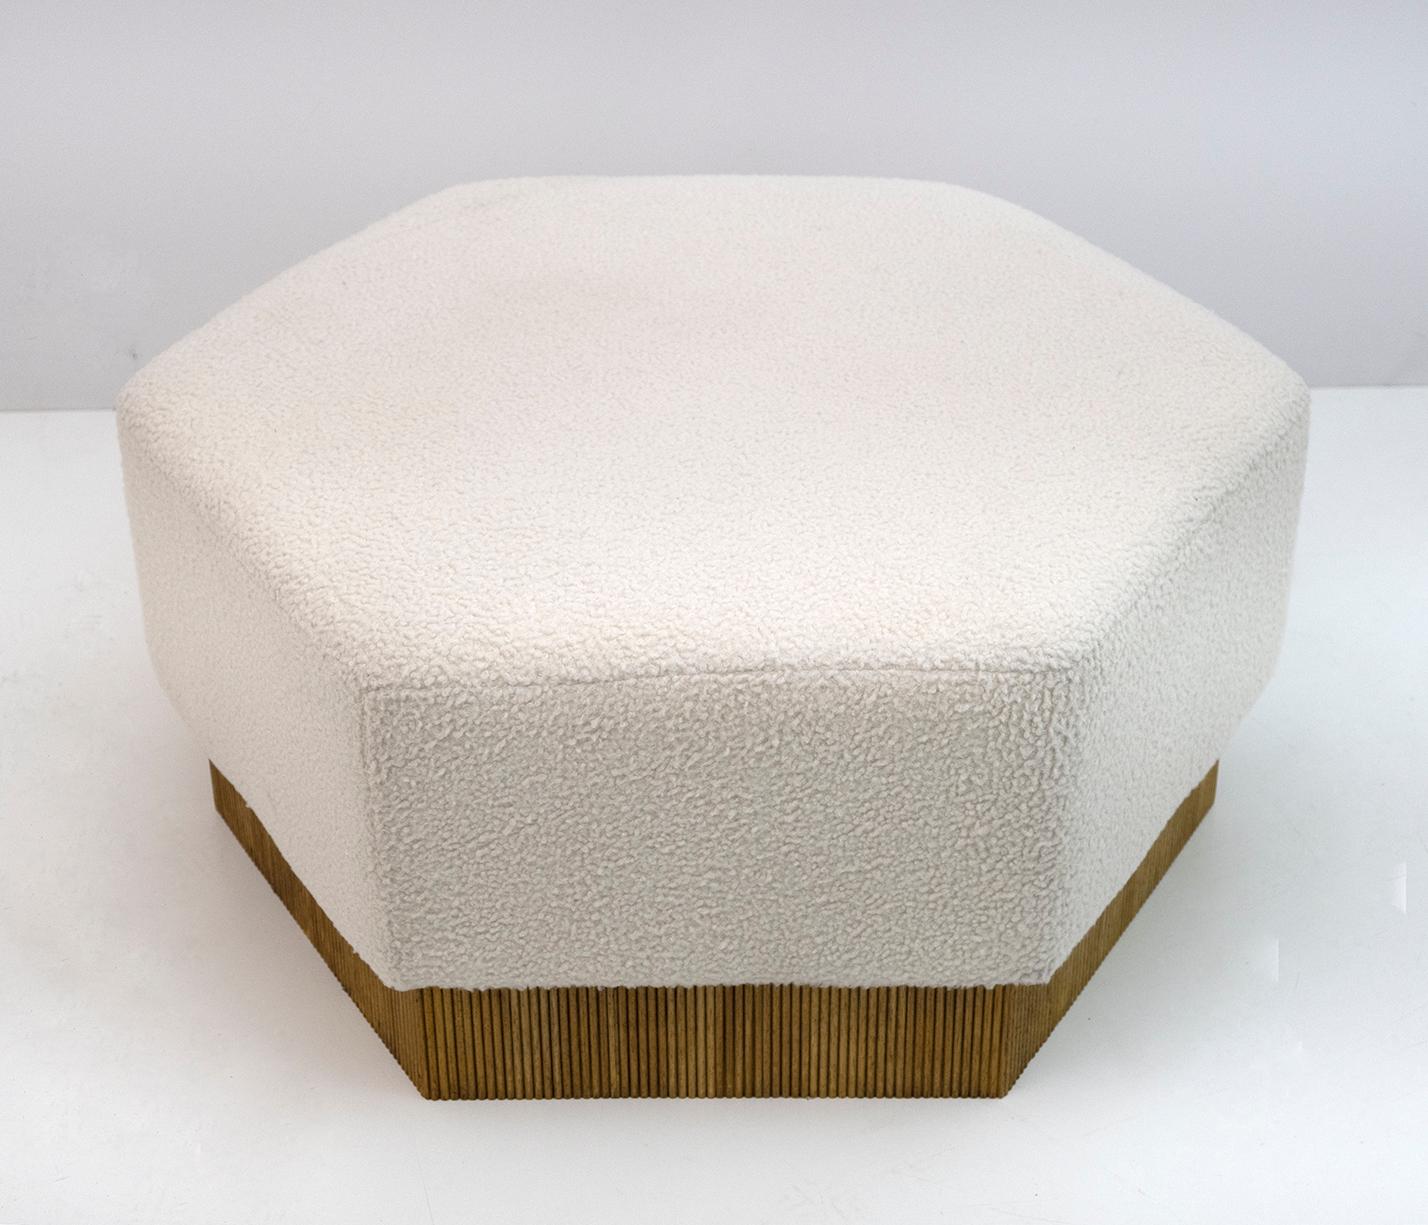 A hexagonal pouf with white boucle seat and wooden base with breadstick processing.
Restored and reupholstered.
Great occasional yet solid seating place to also use as a footstool or side table.
A contemporary, highly decorative and versatile